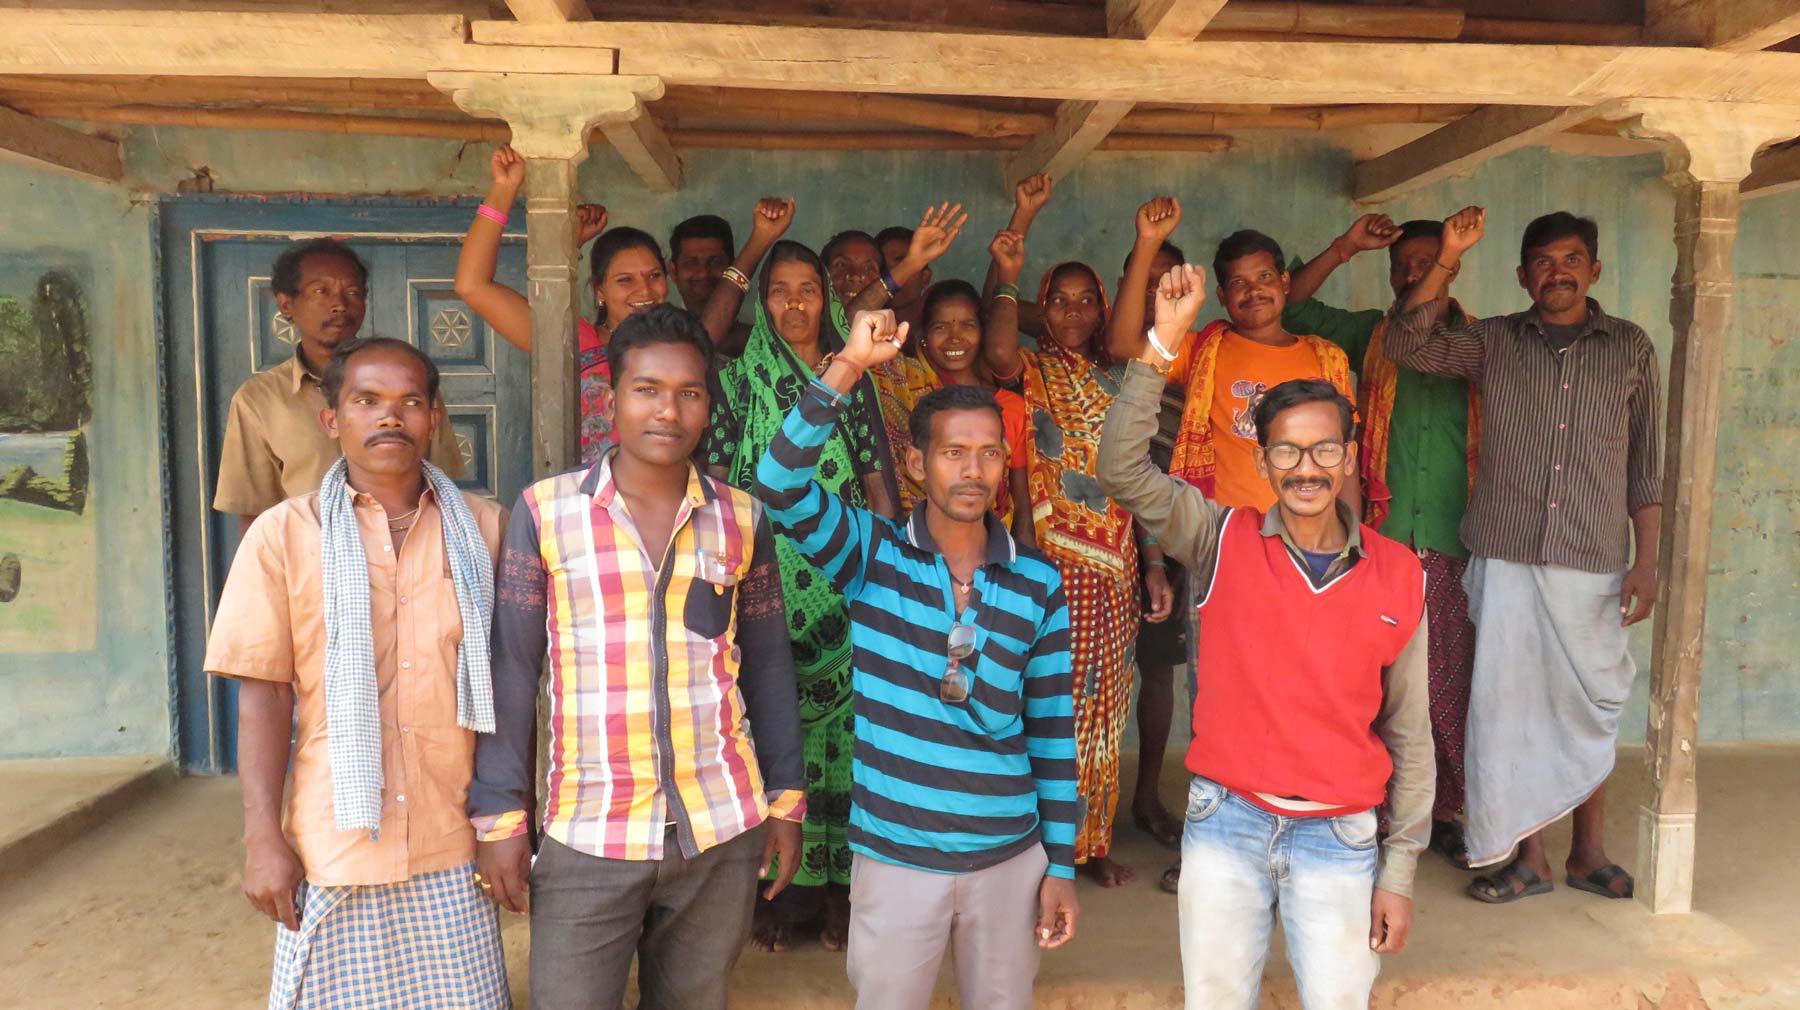 A community group in India